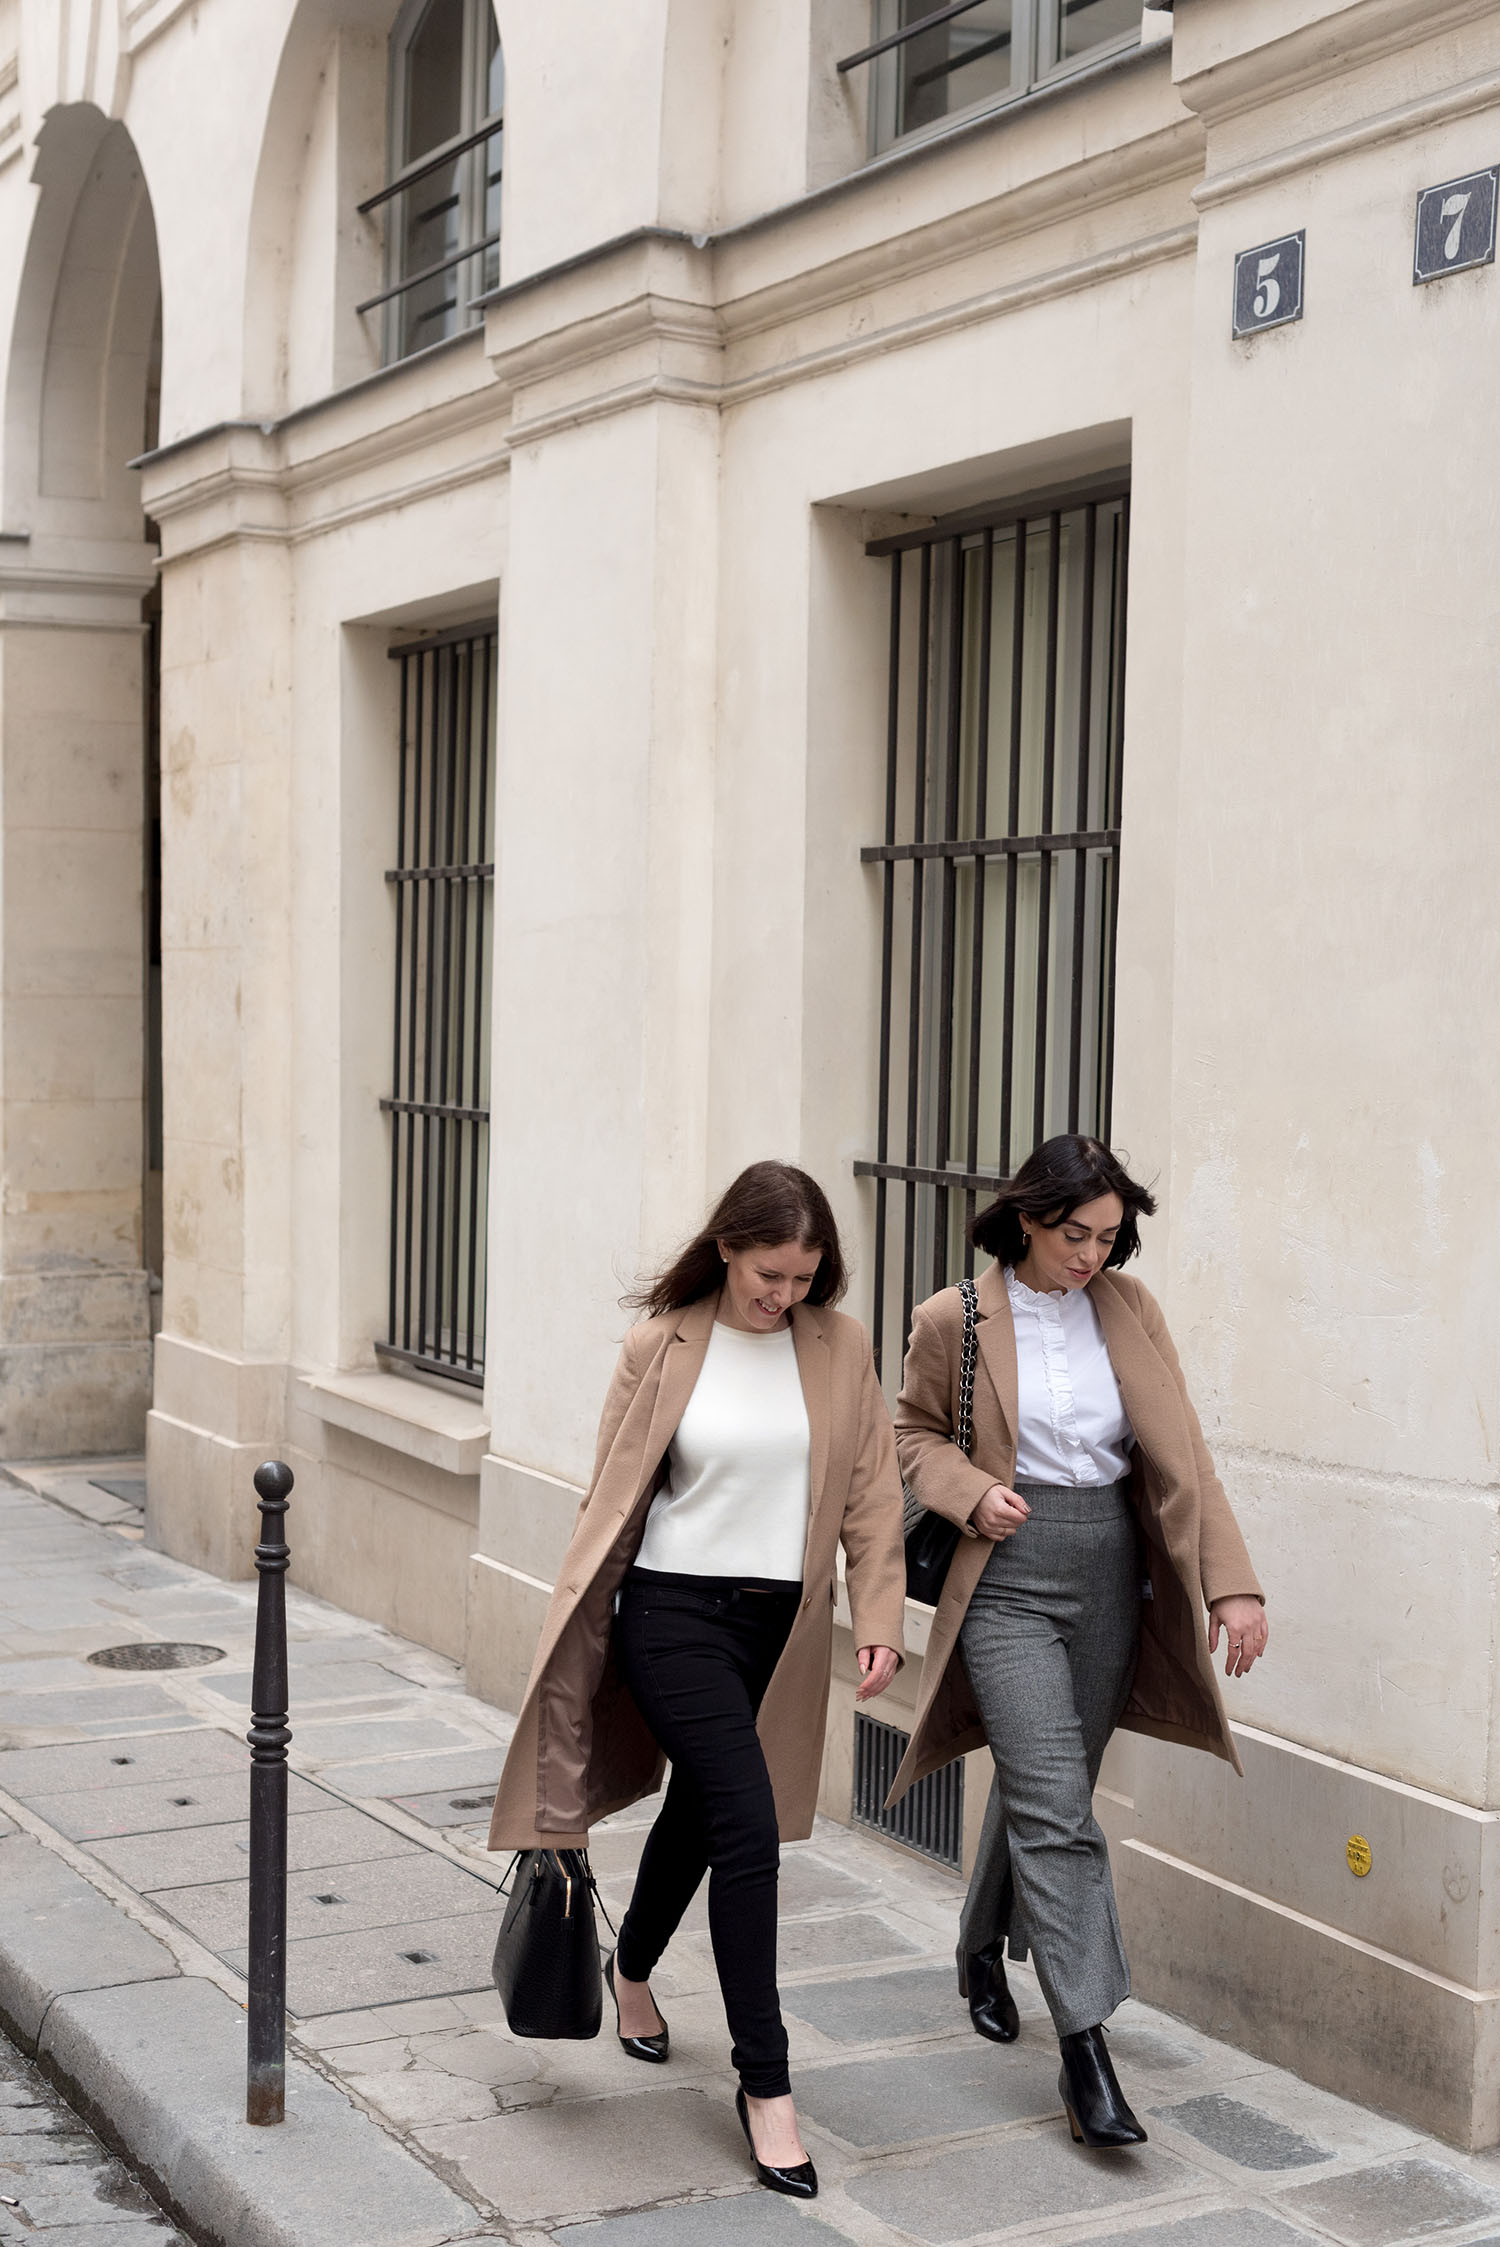 Top Canadian fashion bloggers Cee Fardoe of Coco & Vera and Lyndi Barrett of Style Calling walk at the Palais-Royal in Paris, wearing Uniqlo camel coats